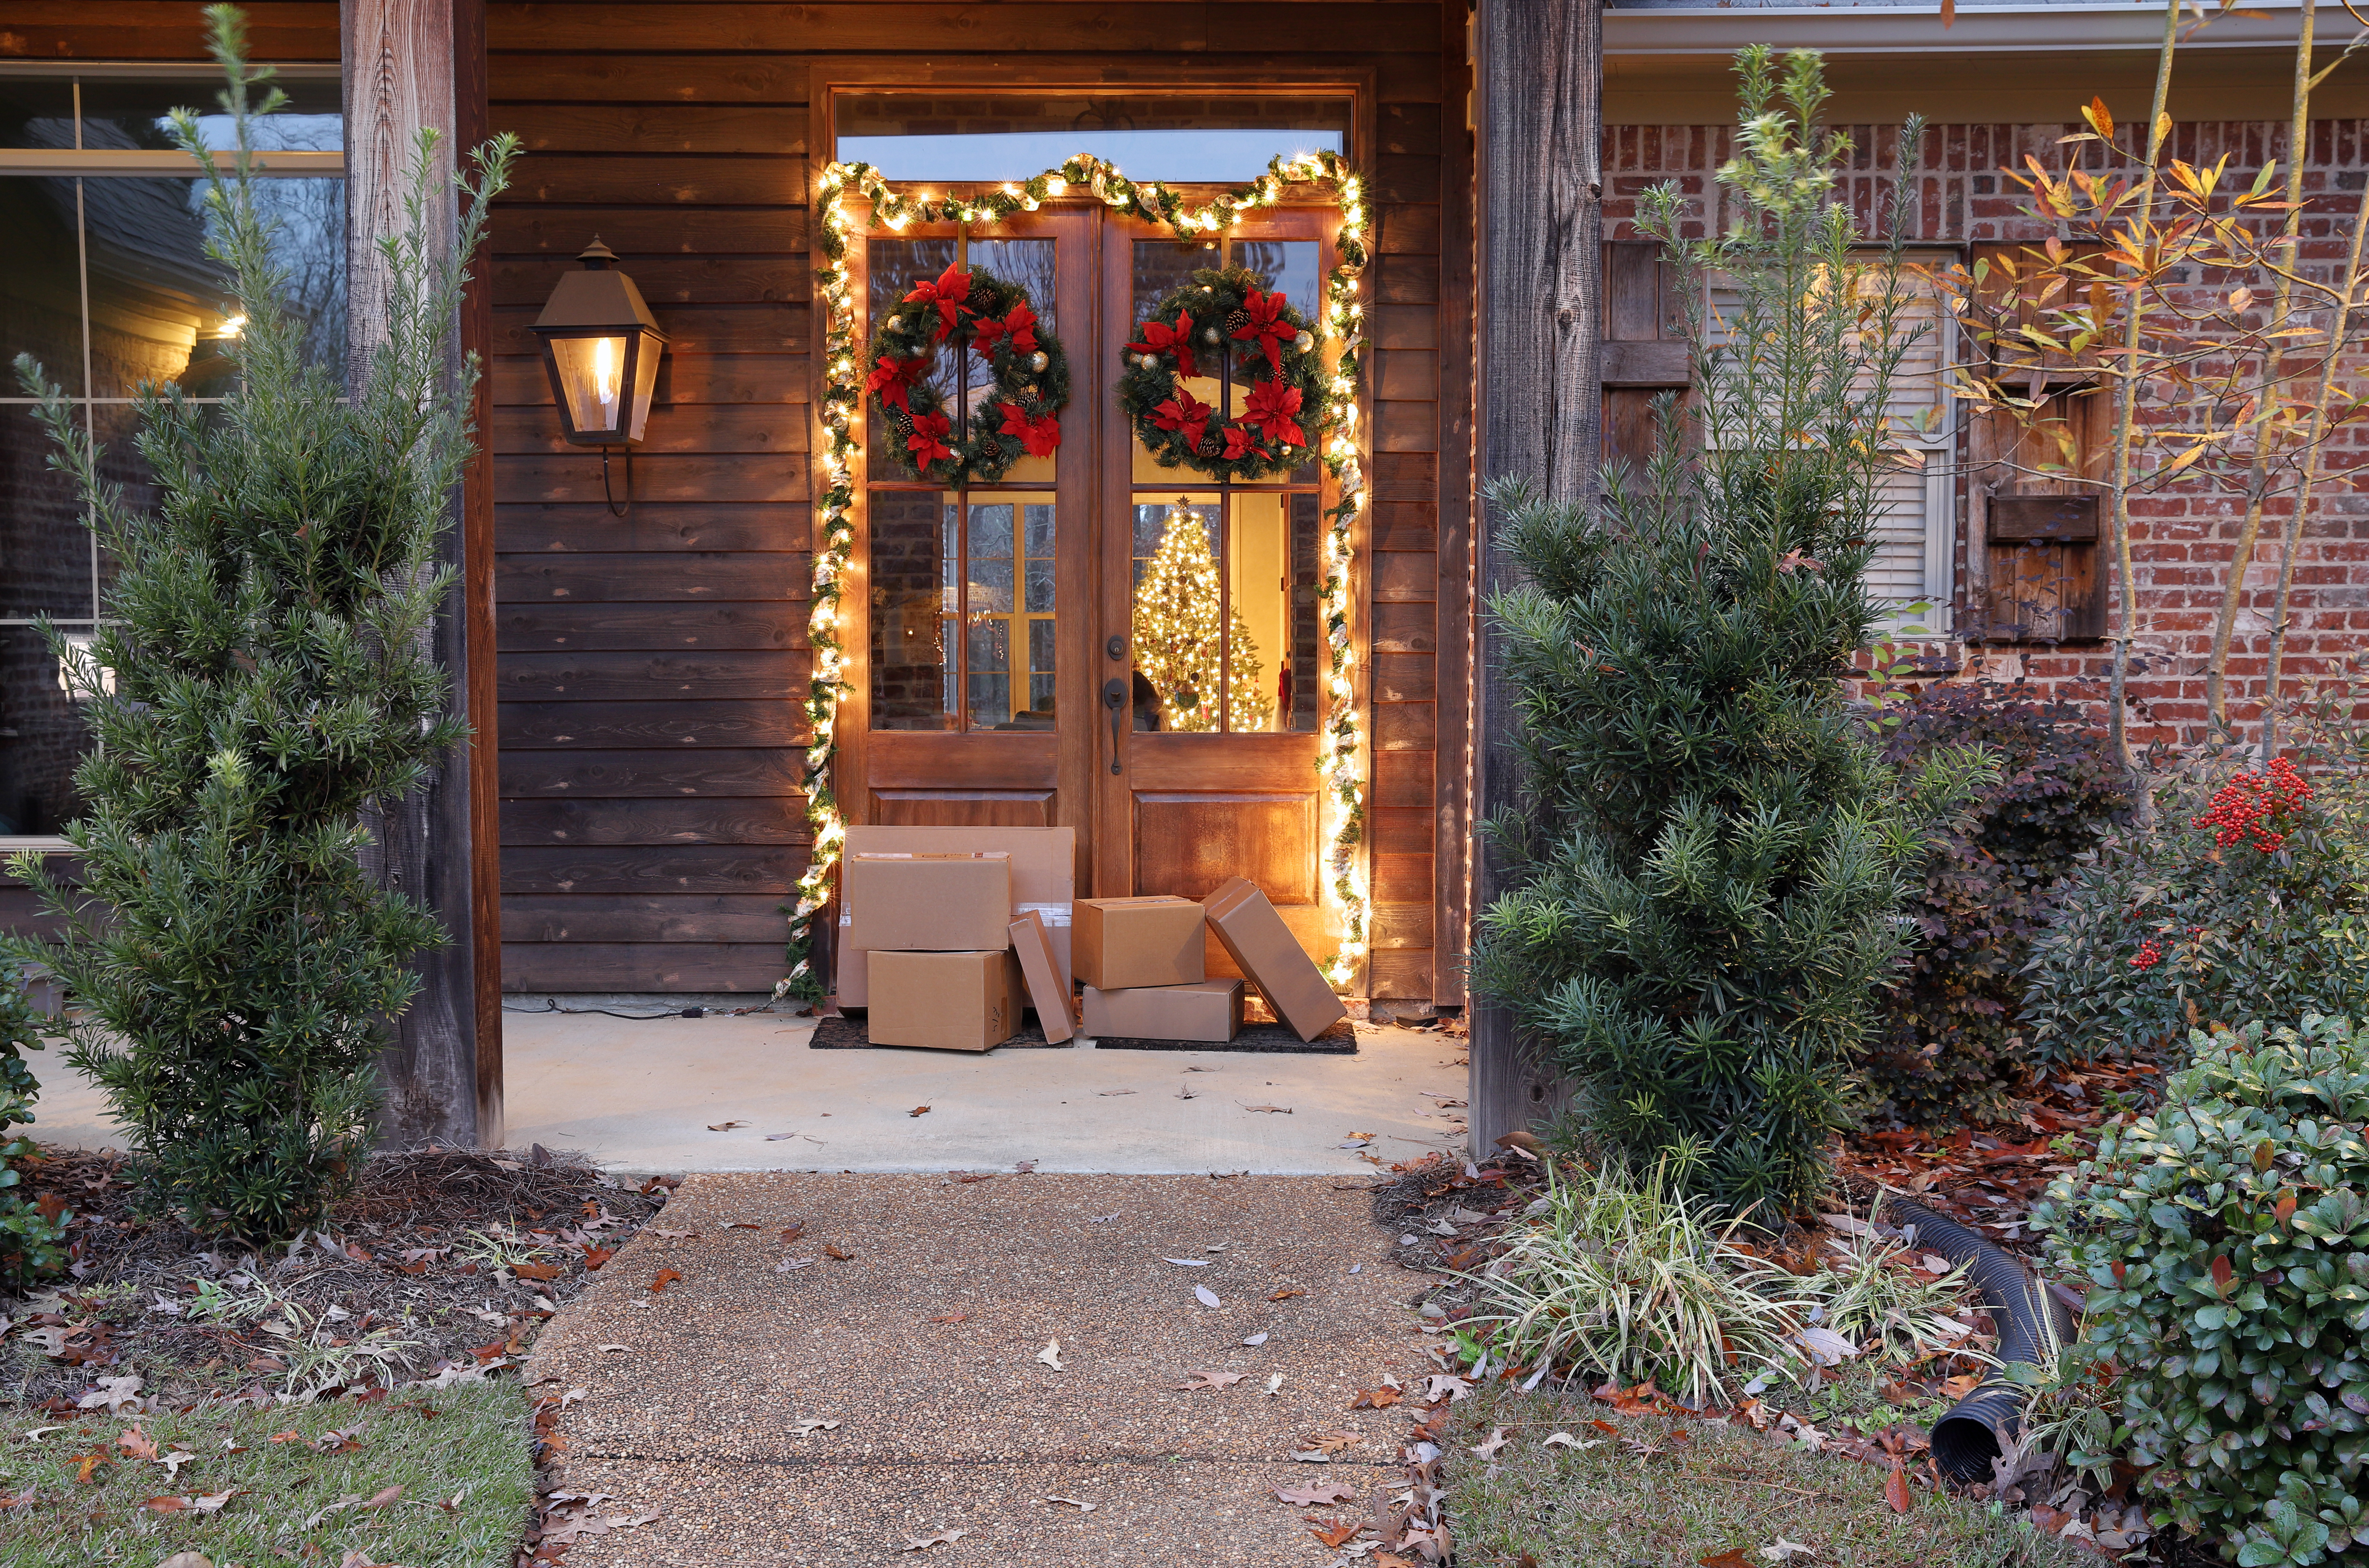 Boxes and packages placed next to front door during Christmastime | Source: Shutterstock